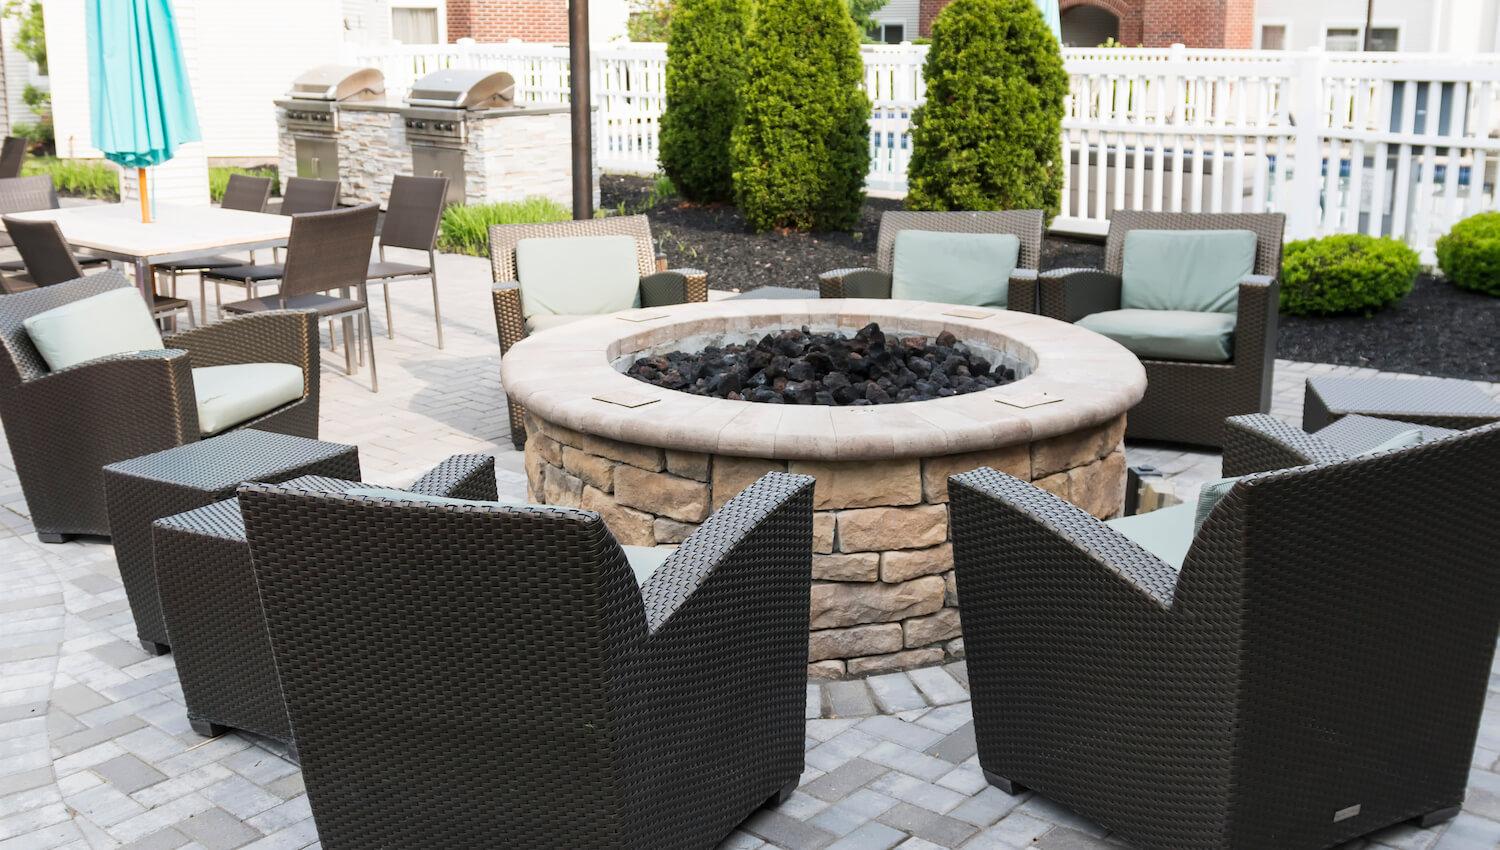 Why You Should Consider Adding a Brick Fire Pit to Your Backyard